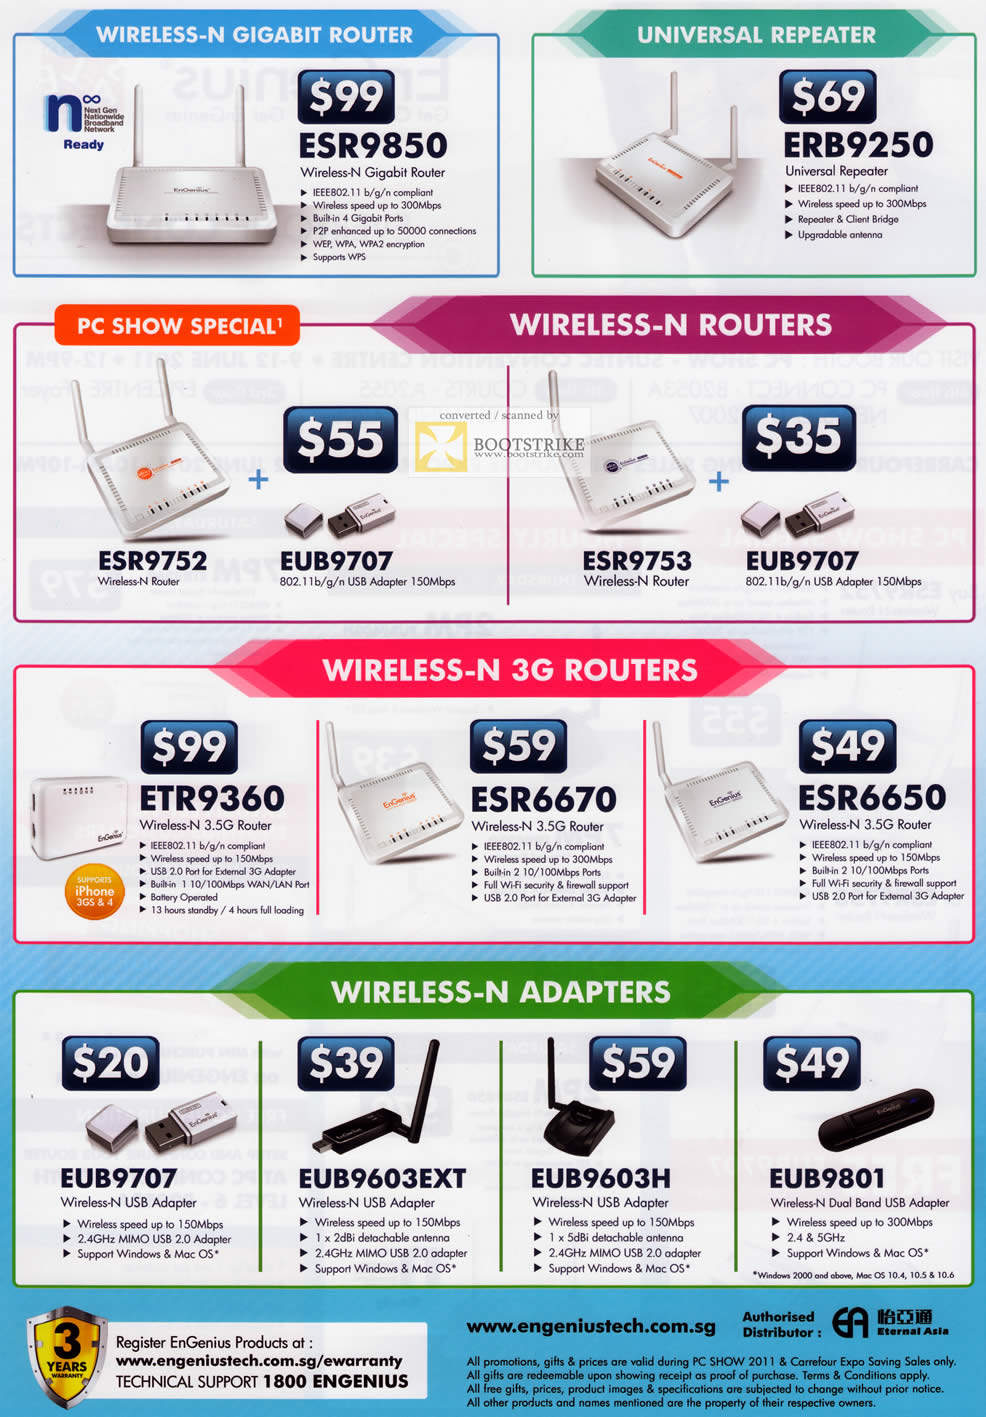 PC Show 2011 price list image brochure of Engenius Networking Wireless N Router Repeater Universal 3G Adapter USB Dual Band